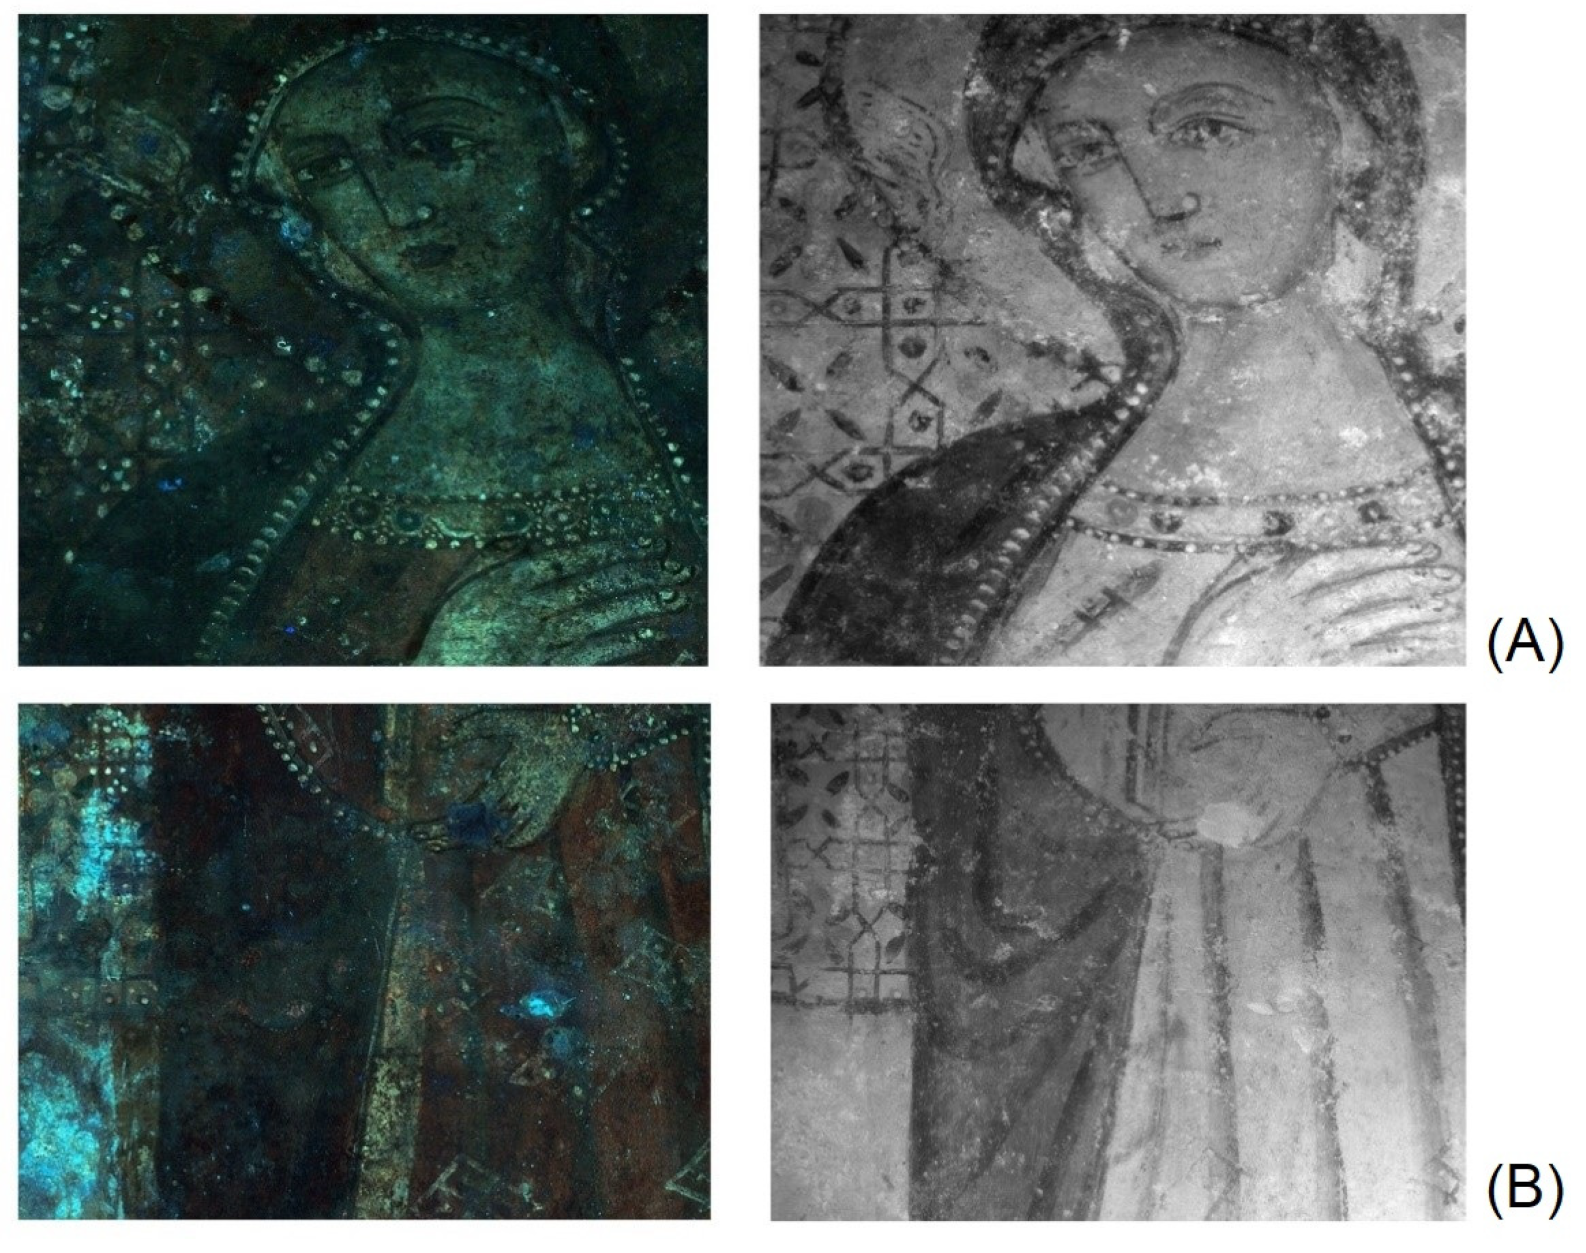 Details (at different magnifications) of the (from left) UVF and IR images for the comparison of the diagnostic information obtained from the imaging techniques: (A) Detail of the face and the halo; (B) detail of the dress and of the background floral-geometric decoration.